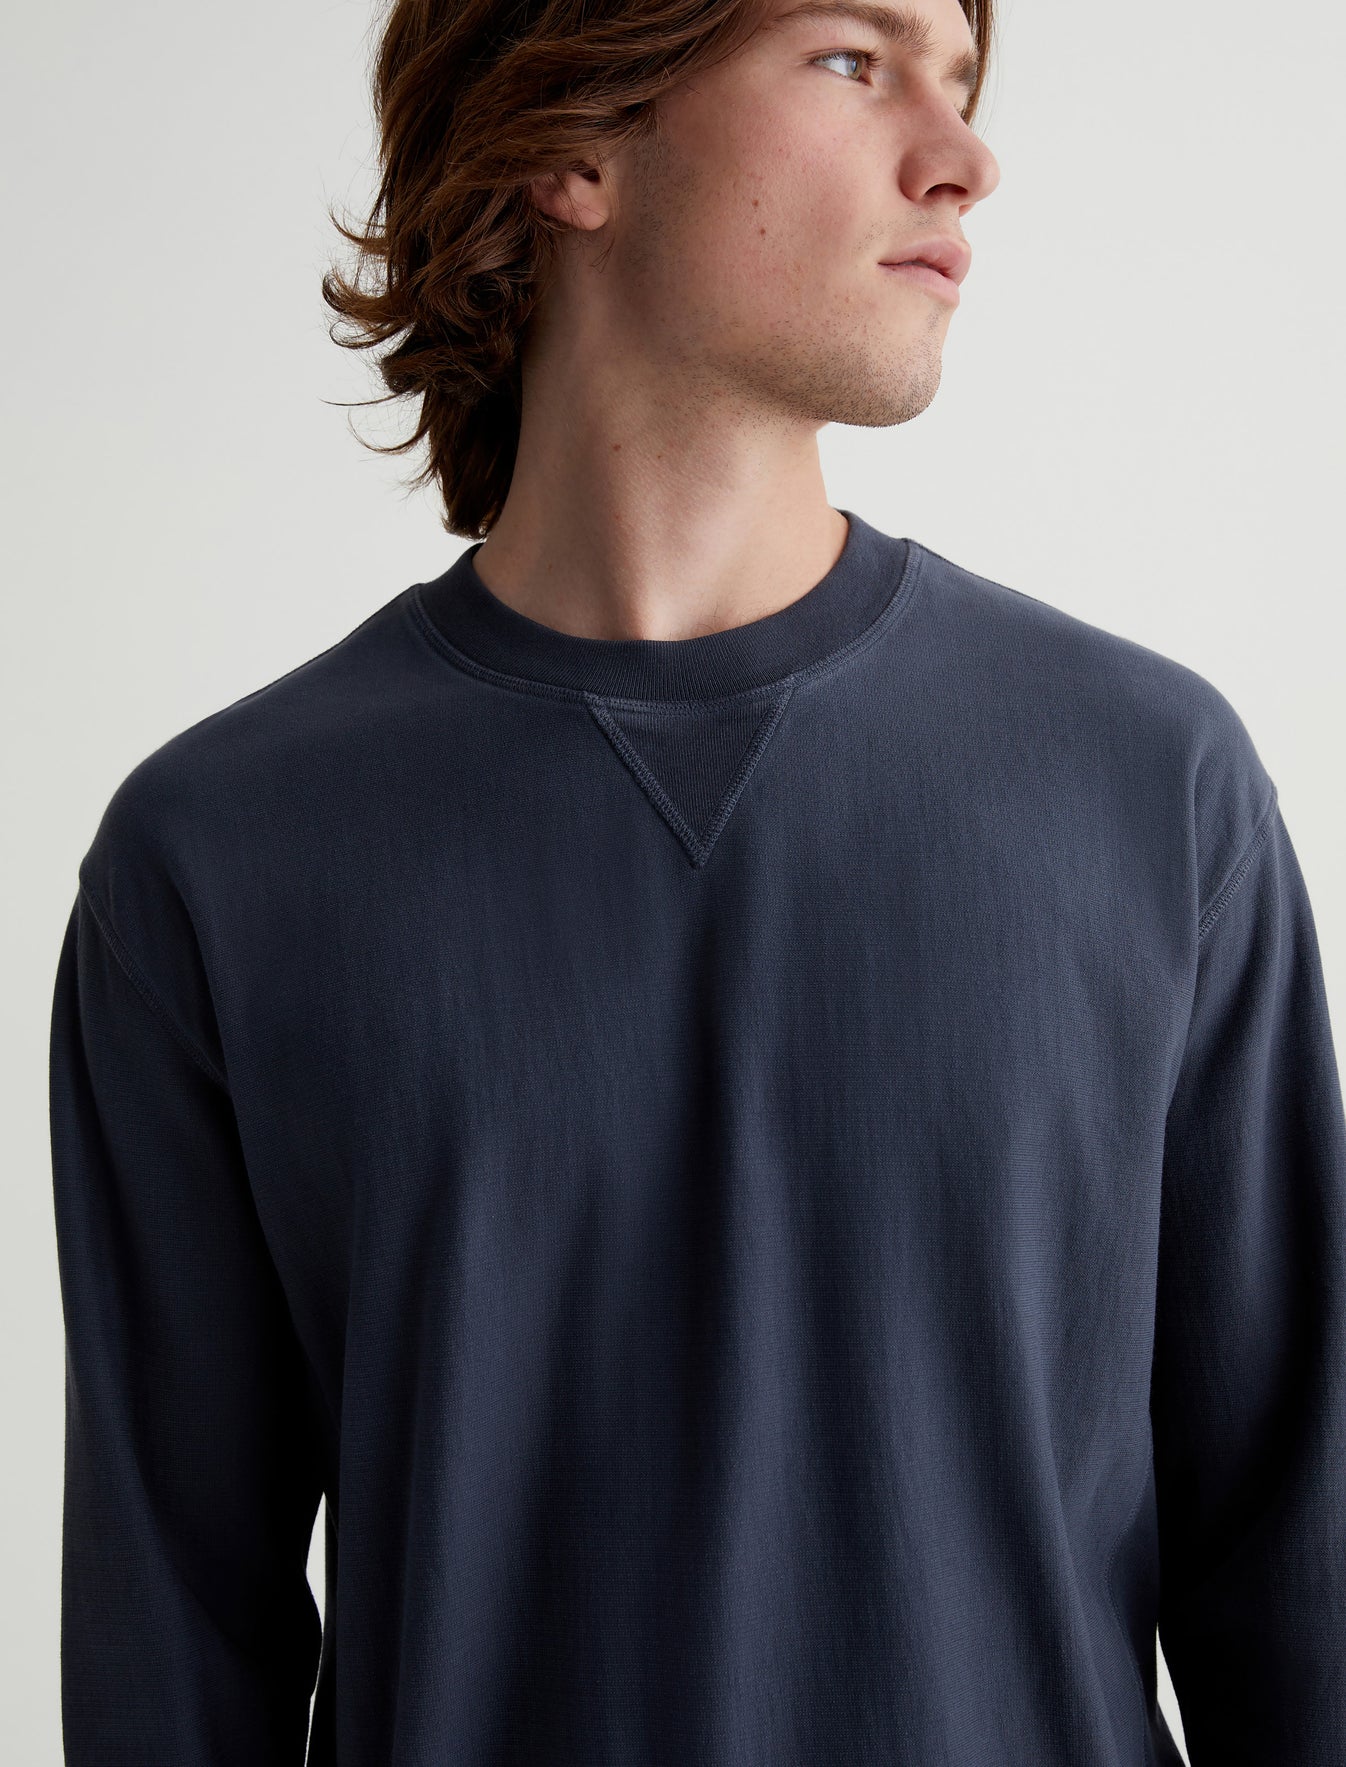 Arc Panelled Sweatshirt|AG-ed Relaxed Crew Neck Panelled